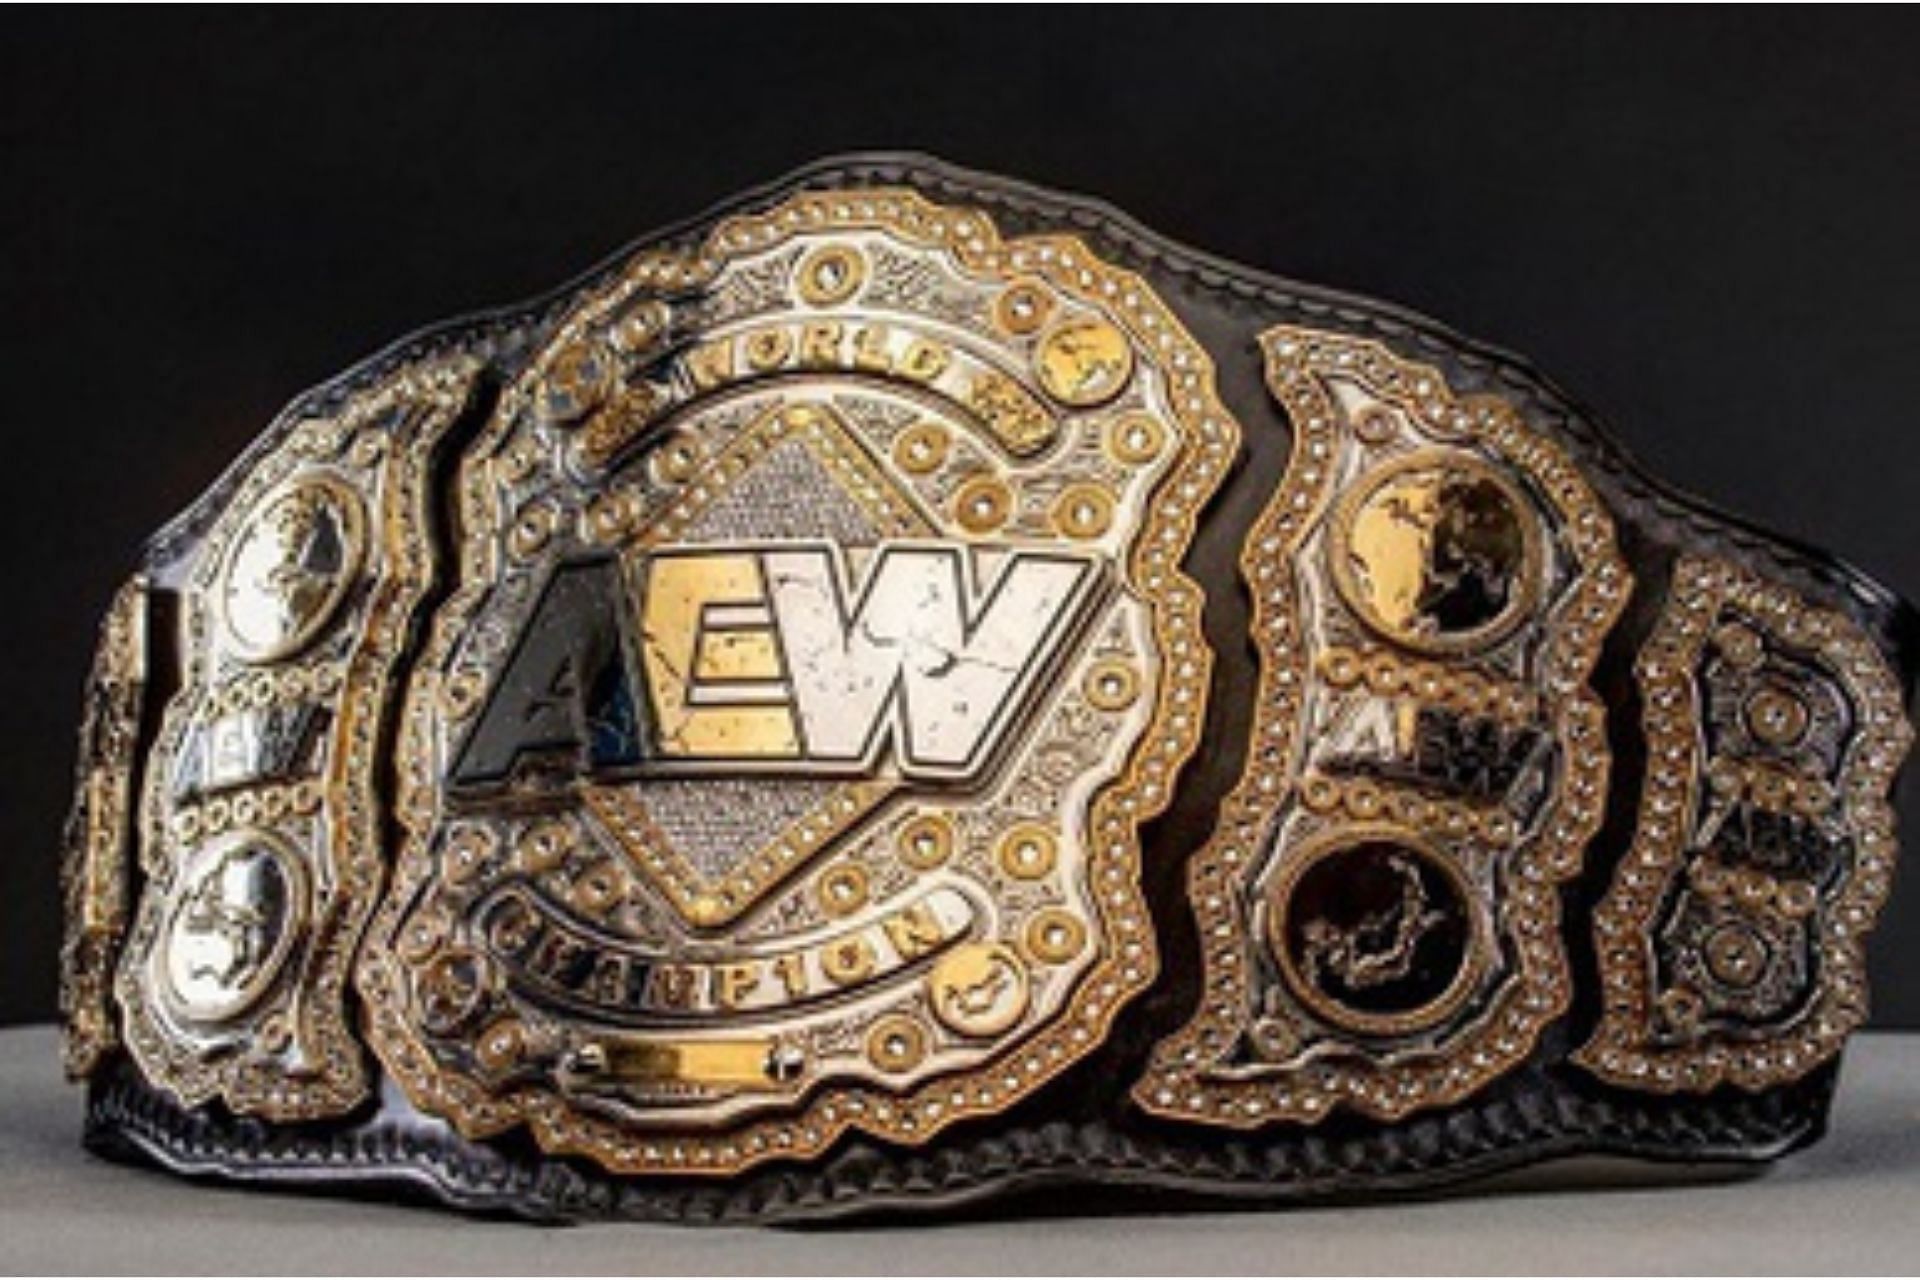 AEW World Championship is up for grabs at the special AEW Pay-Per-View Worlds End